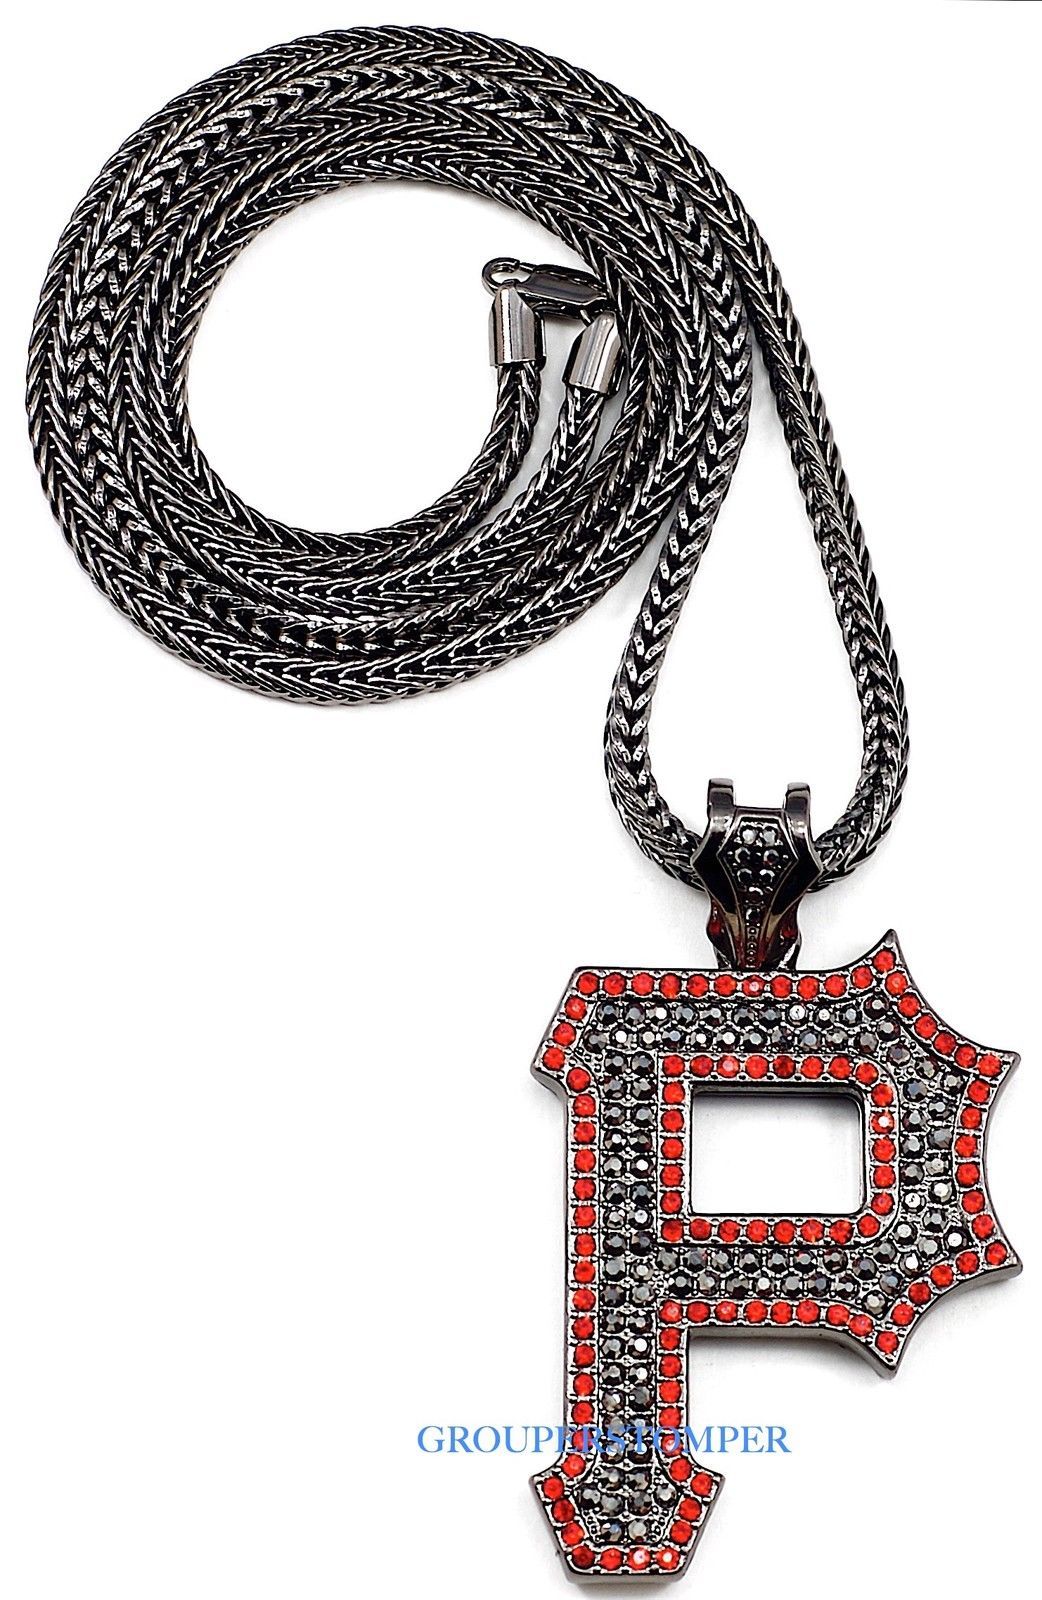 SYRP Necklace New Iced Out Pendant With 36 Inch Chain Hip Hop Style!